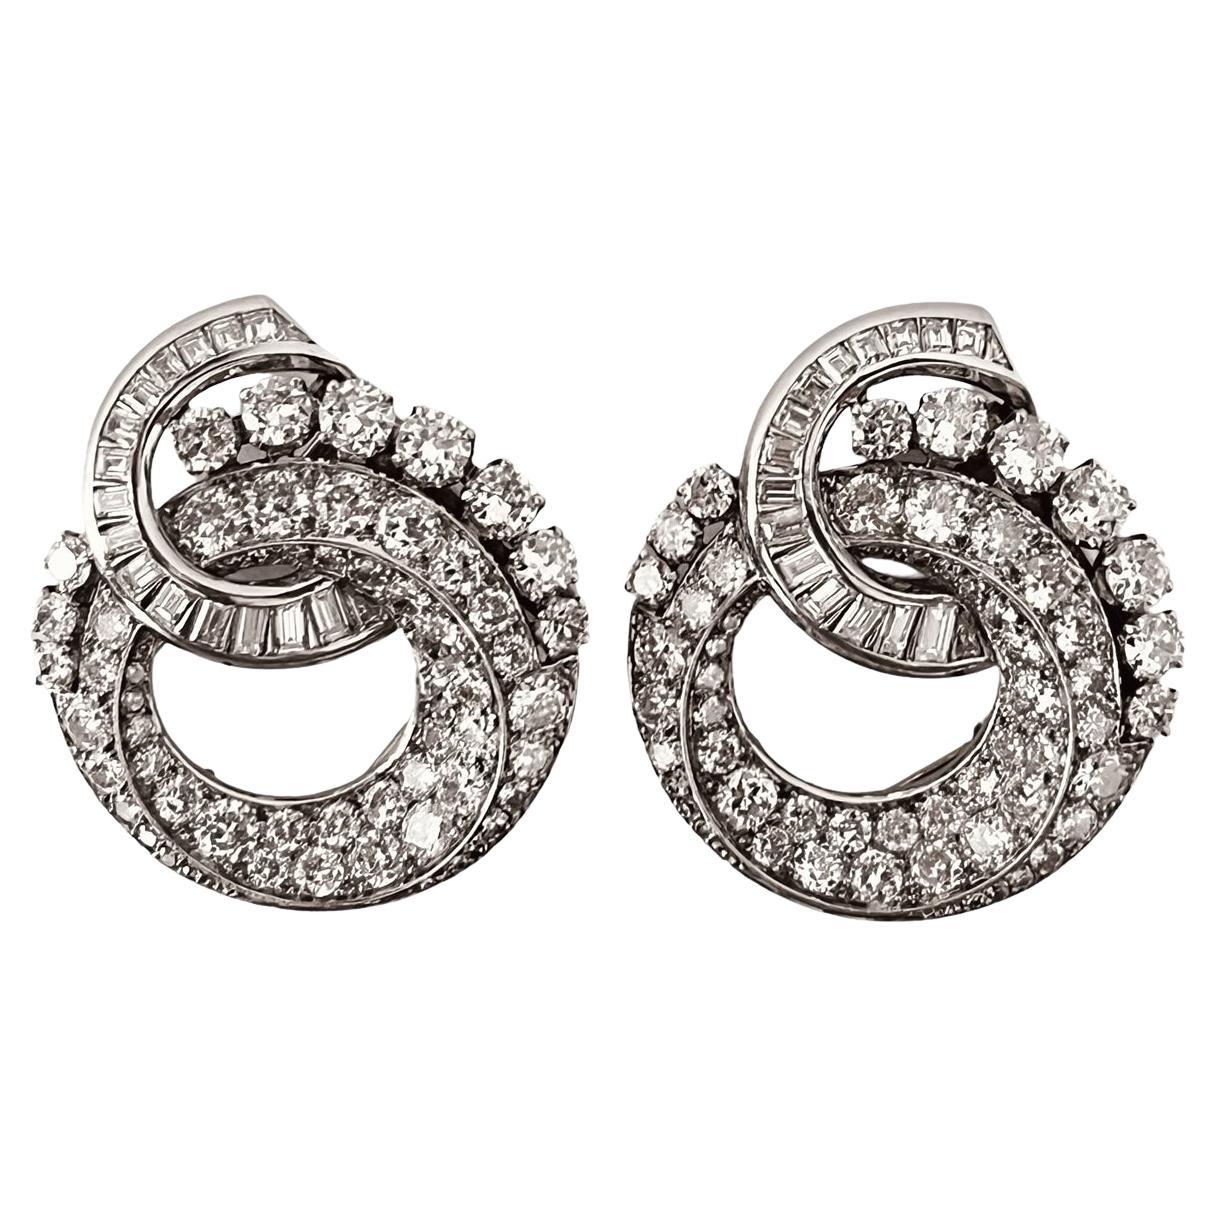 A Pair Of 10 Carats  Diamond Clip Brooches Mounted In Platinum. Circa 1930